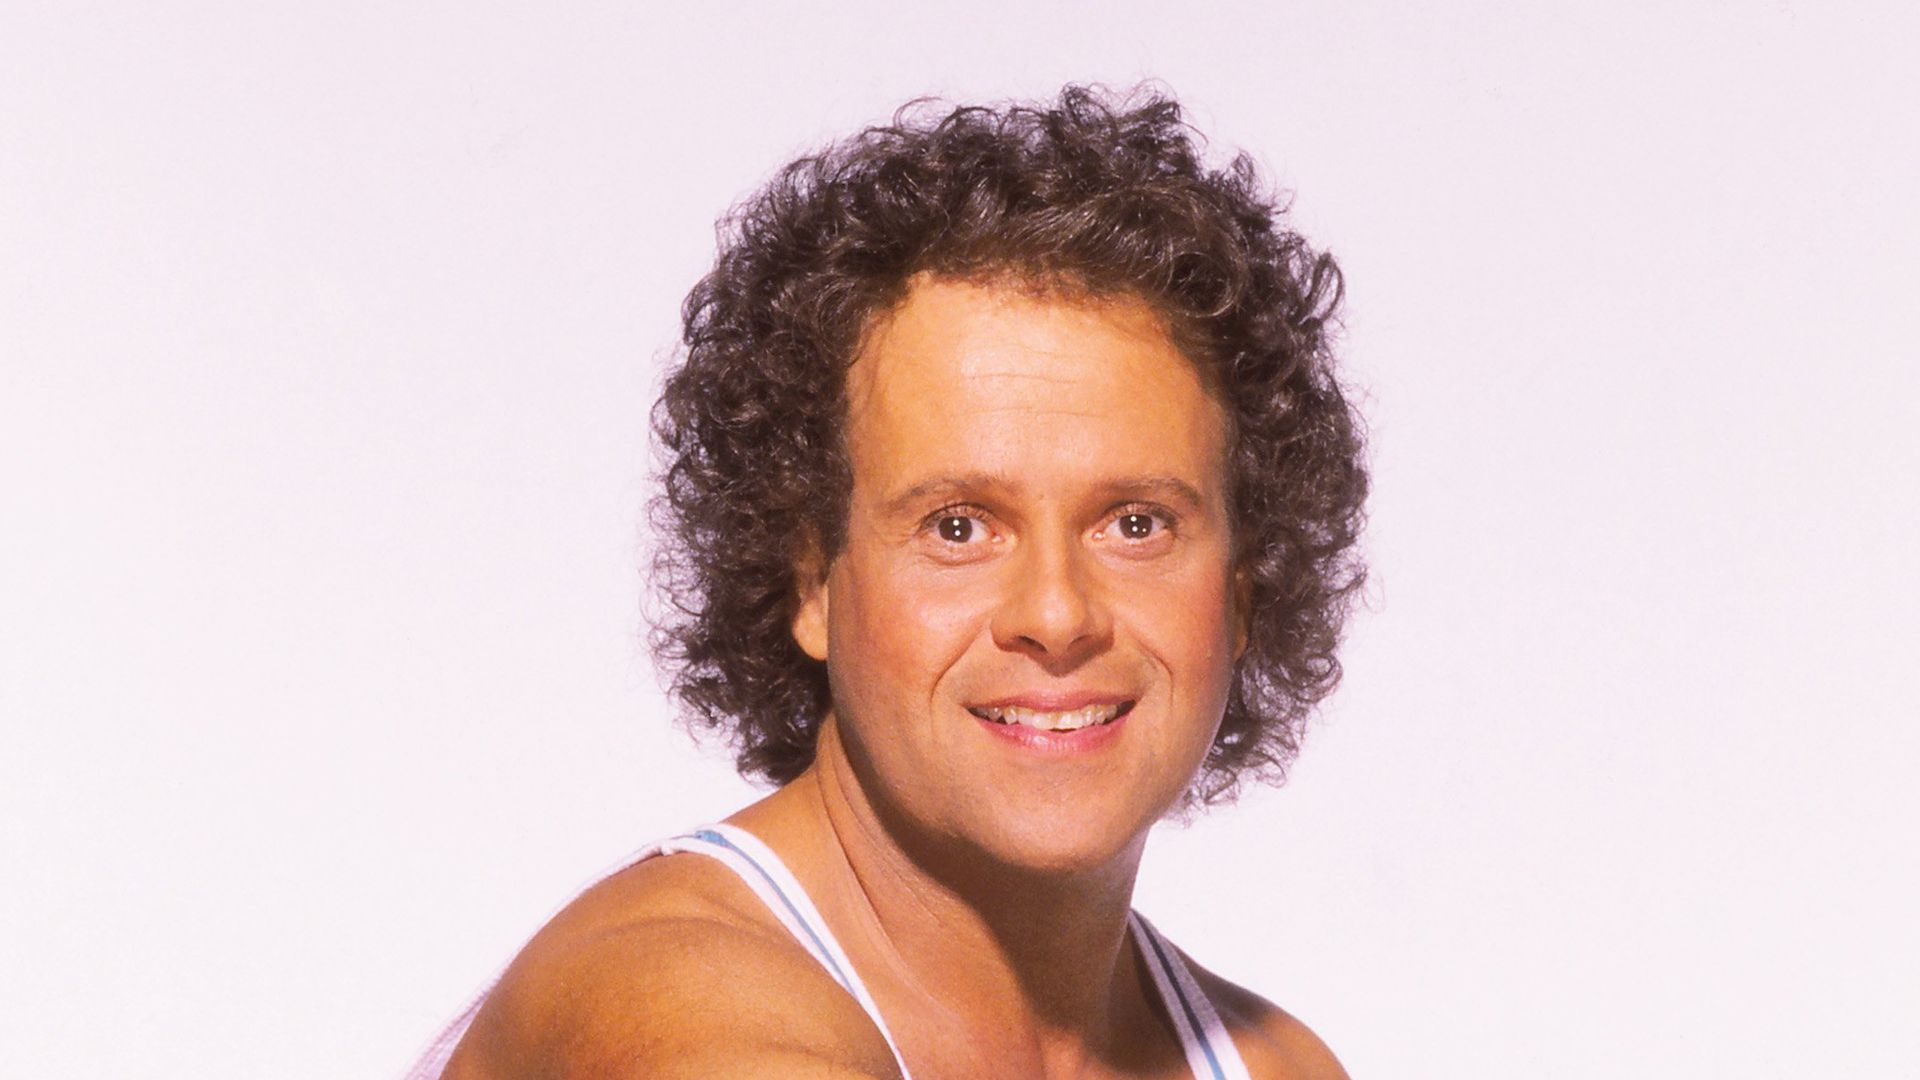 Actor Richard Simmons poses for a portrait in 1992 in Los Angeles, California.